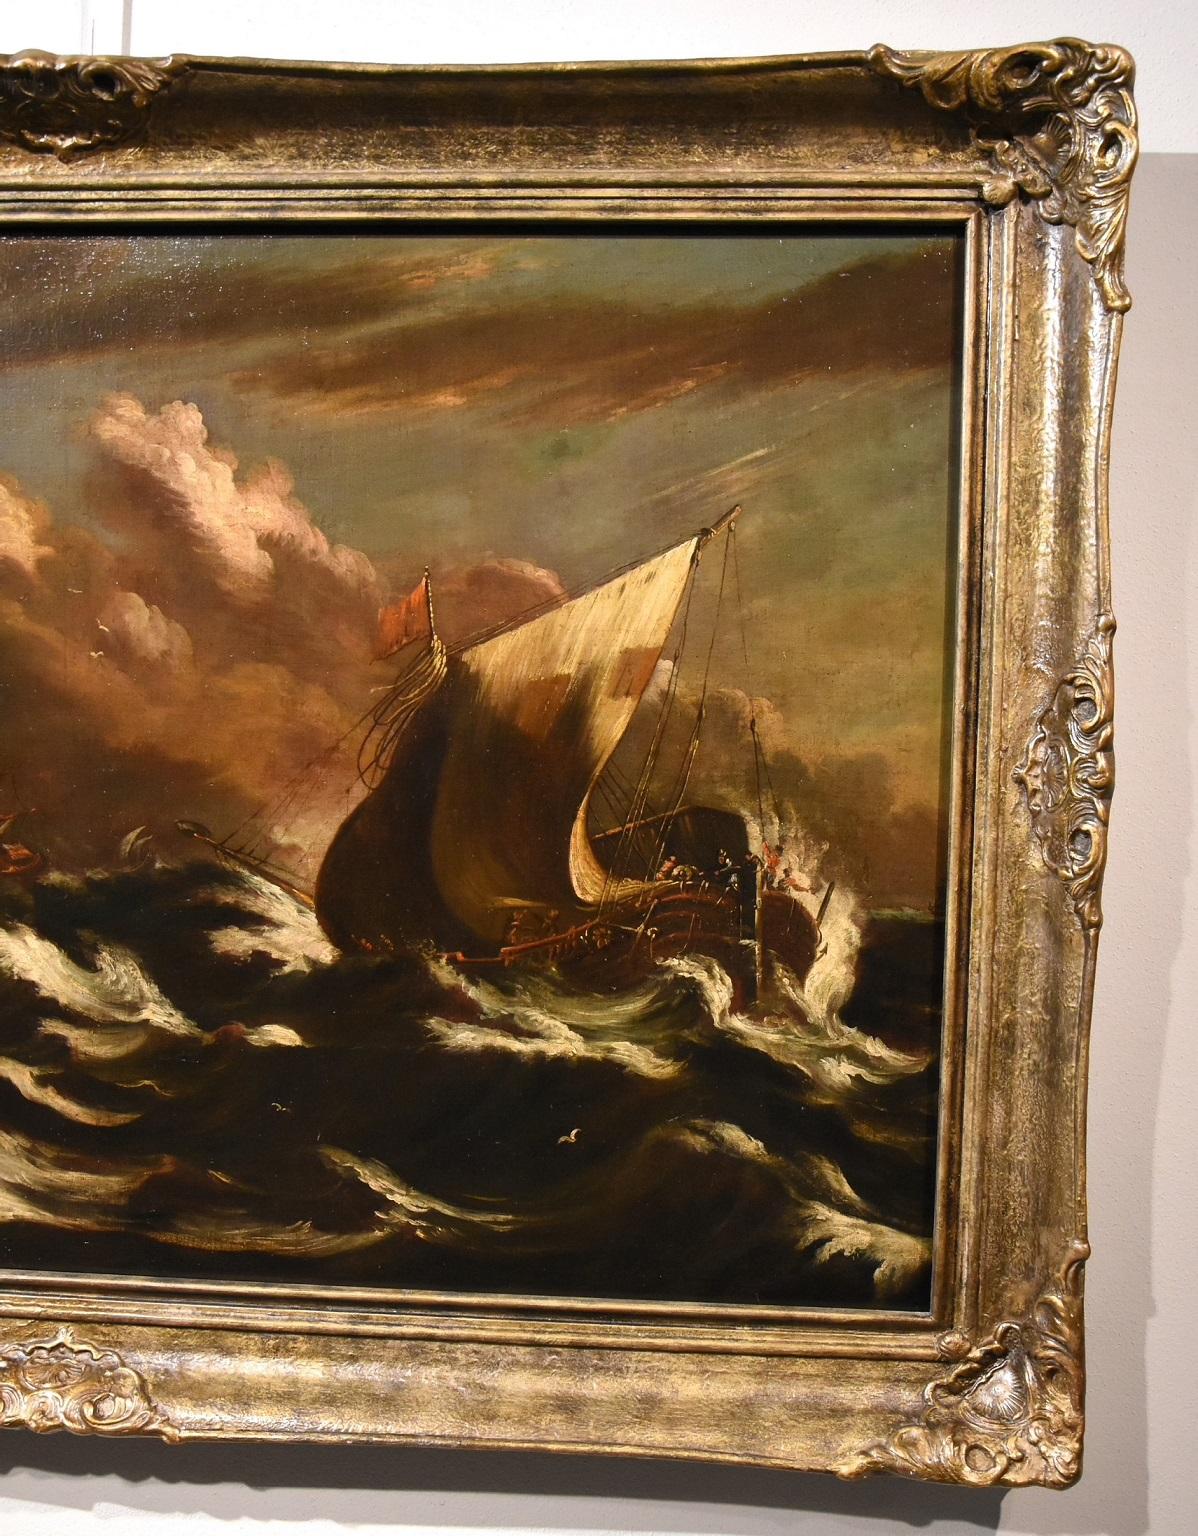 Stormy Ships Van Plattenberg Marina Paint Oil on canvas Old master 17th Century  For Sale 2